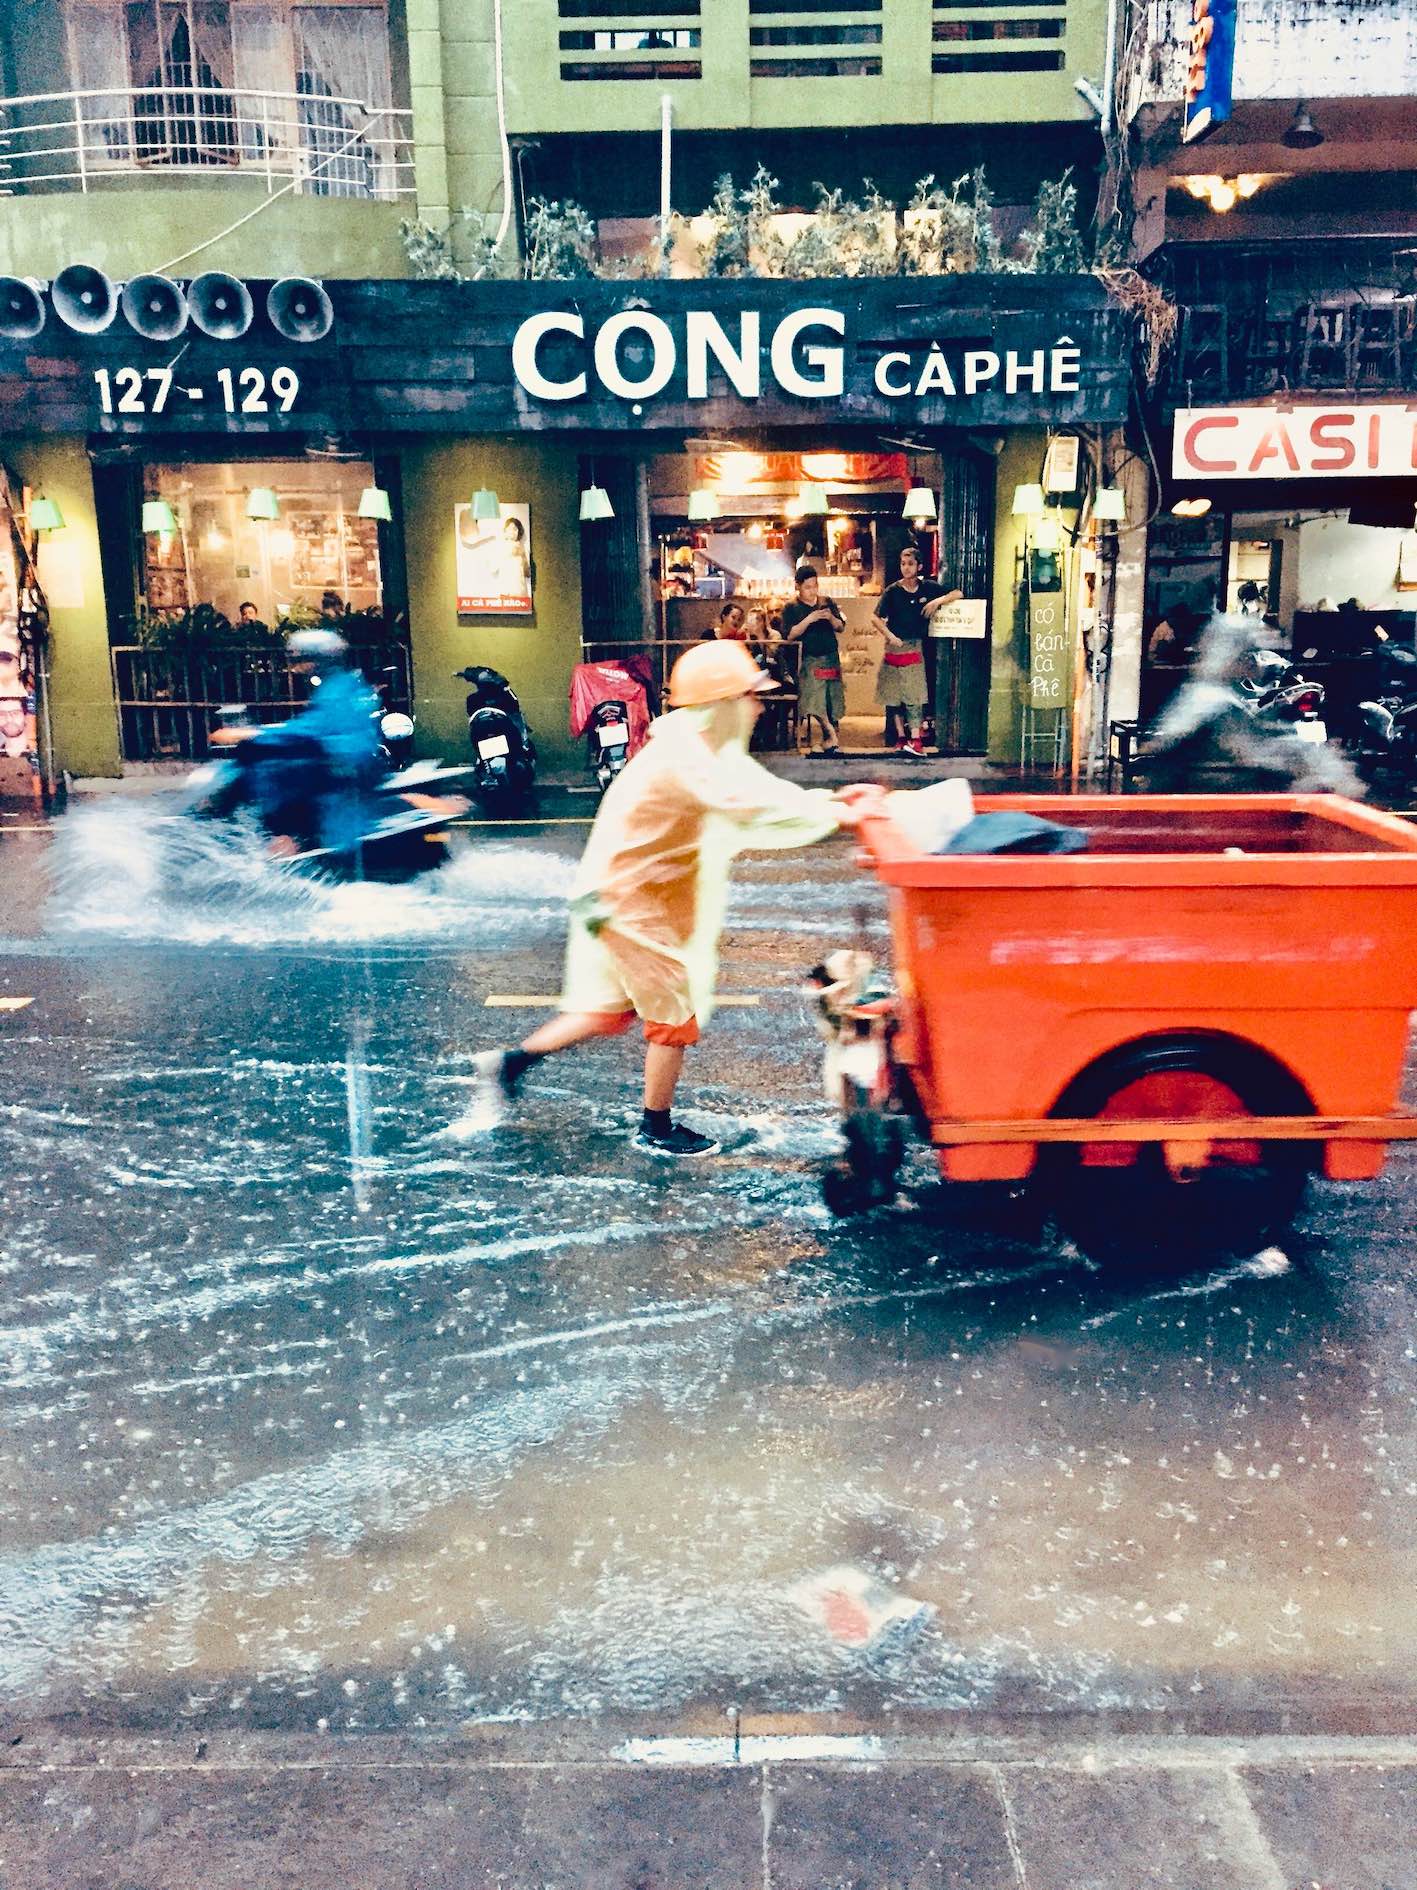 A rainy day on Bui Vien Street in Ho Chi Minh